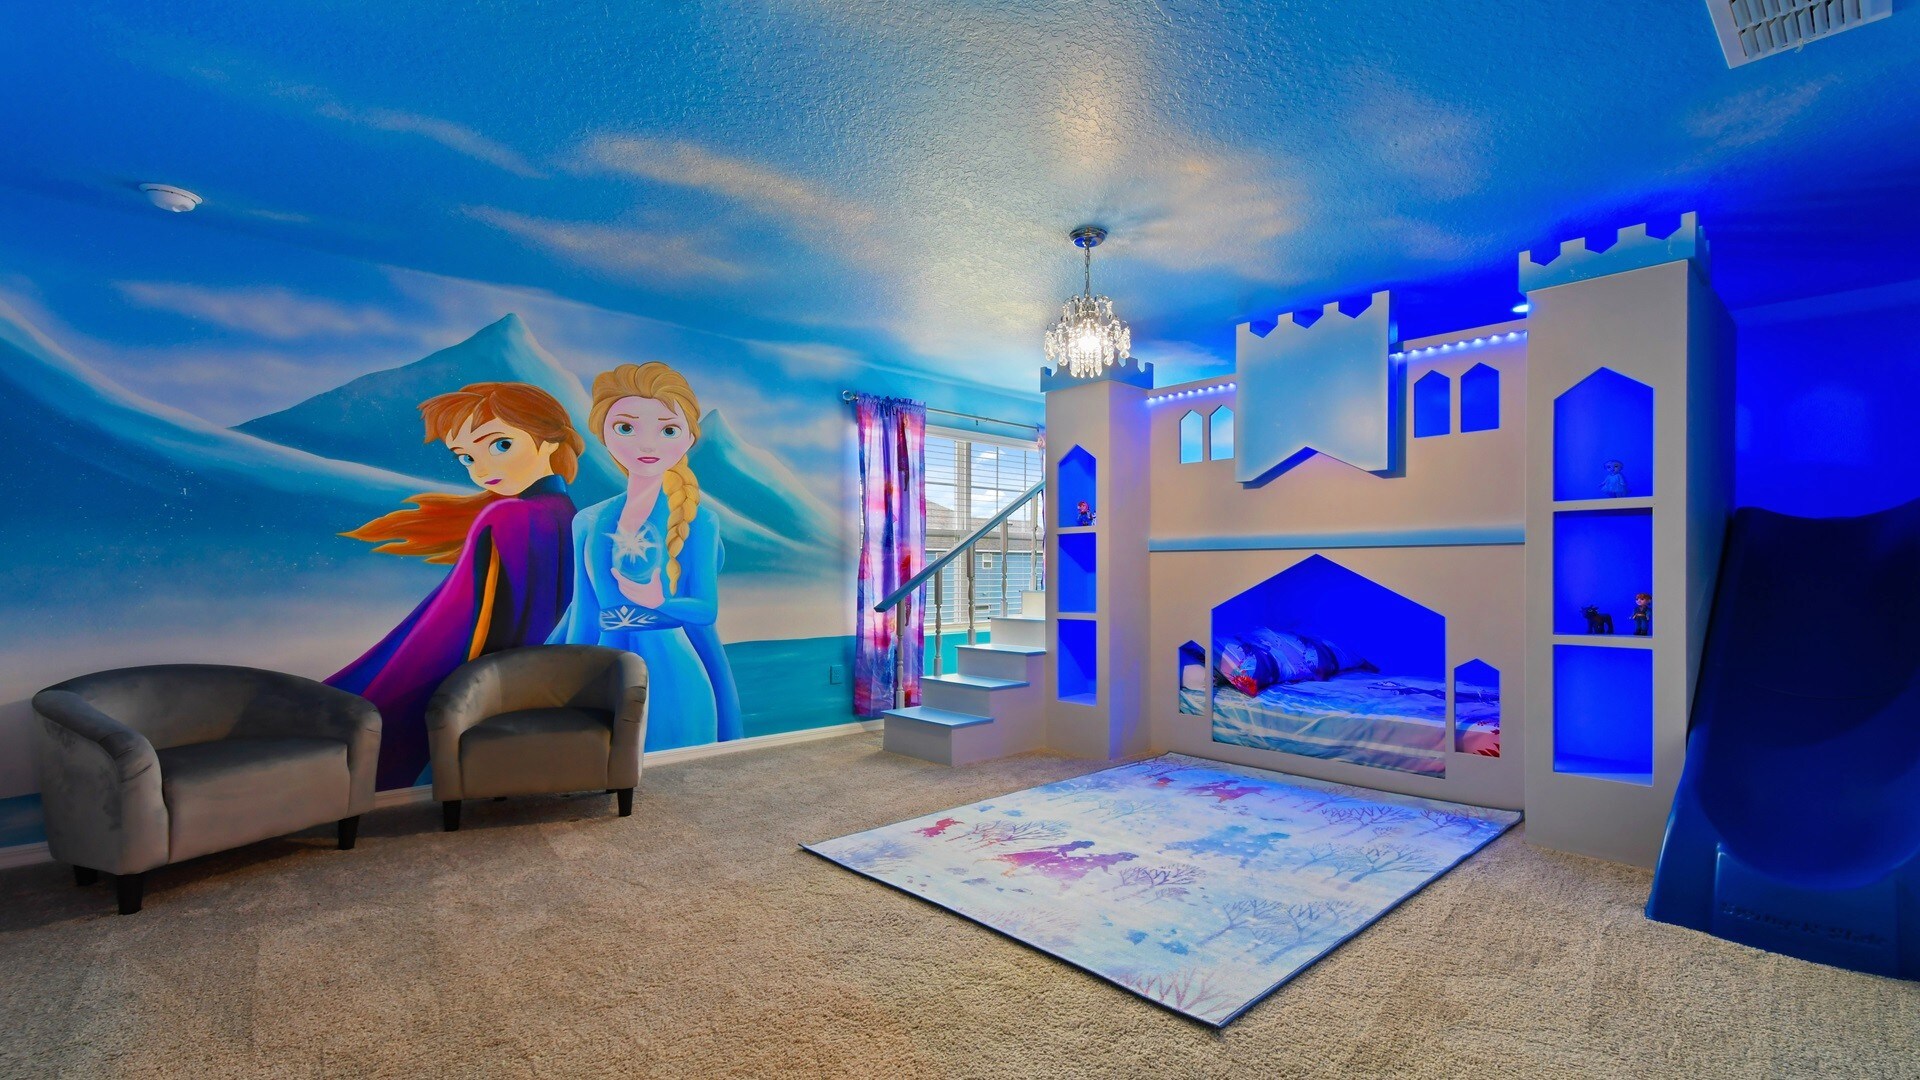 Kids will have fun in this Frozen bedroom with the customized furniture